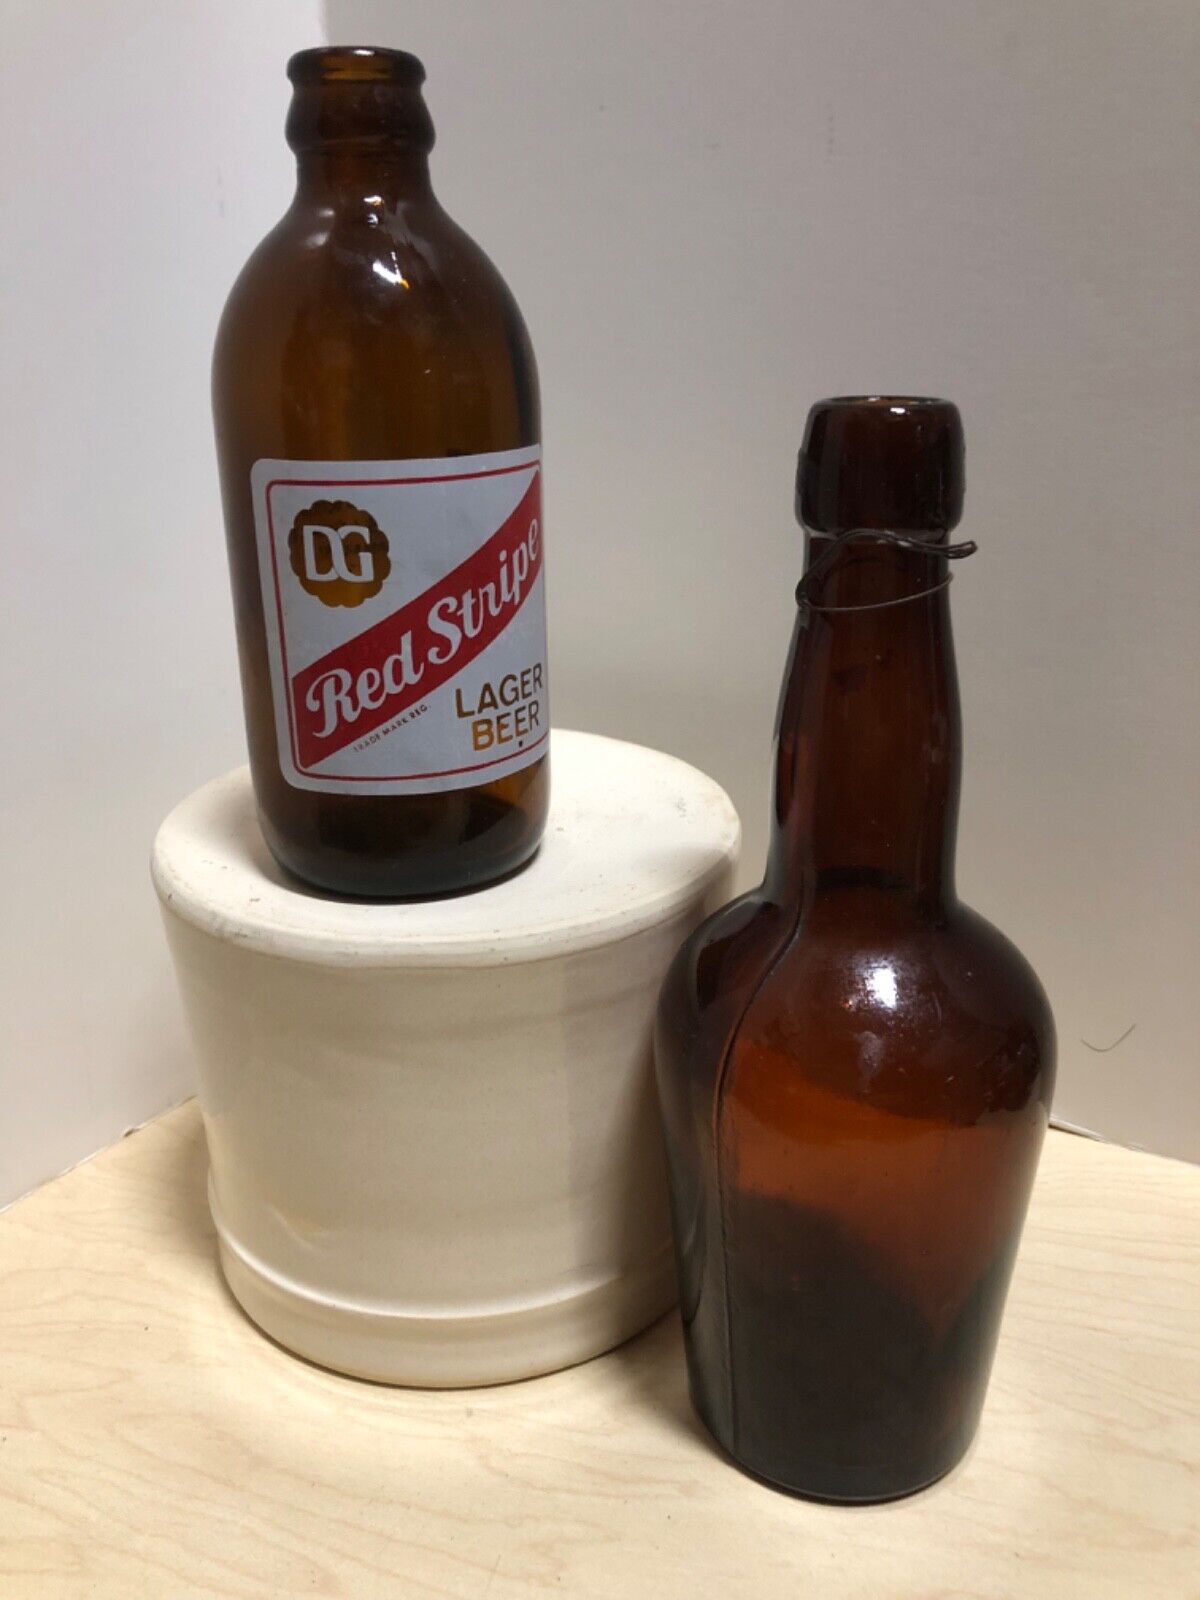 pabst malt extract bottle and red stripe lager beer bottle